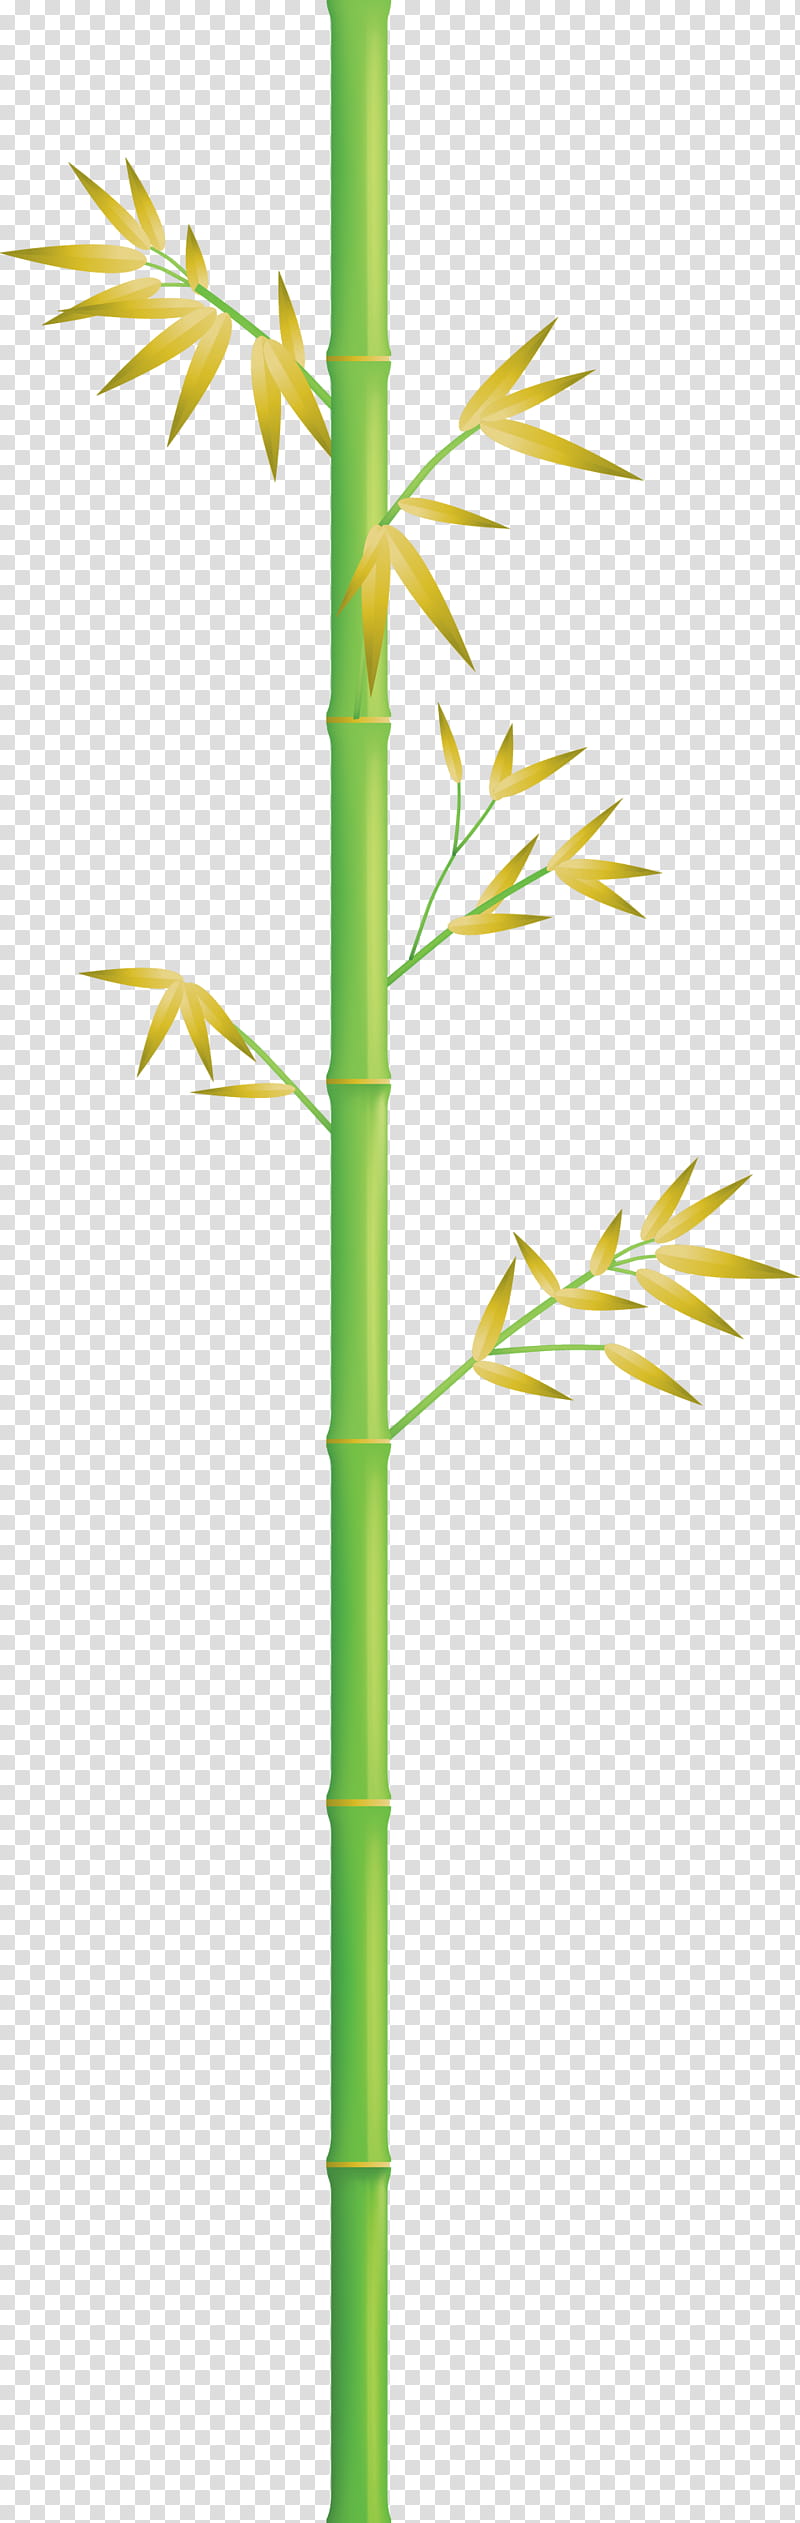 bamboo leaf, Plant Stem, Grass Family, Elymus Repens, Flower transparent background PNG clipart